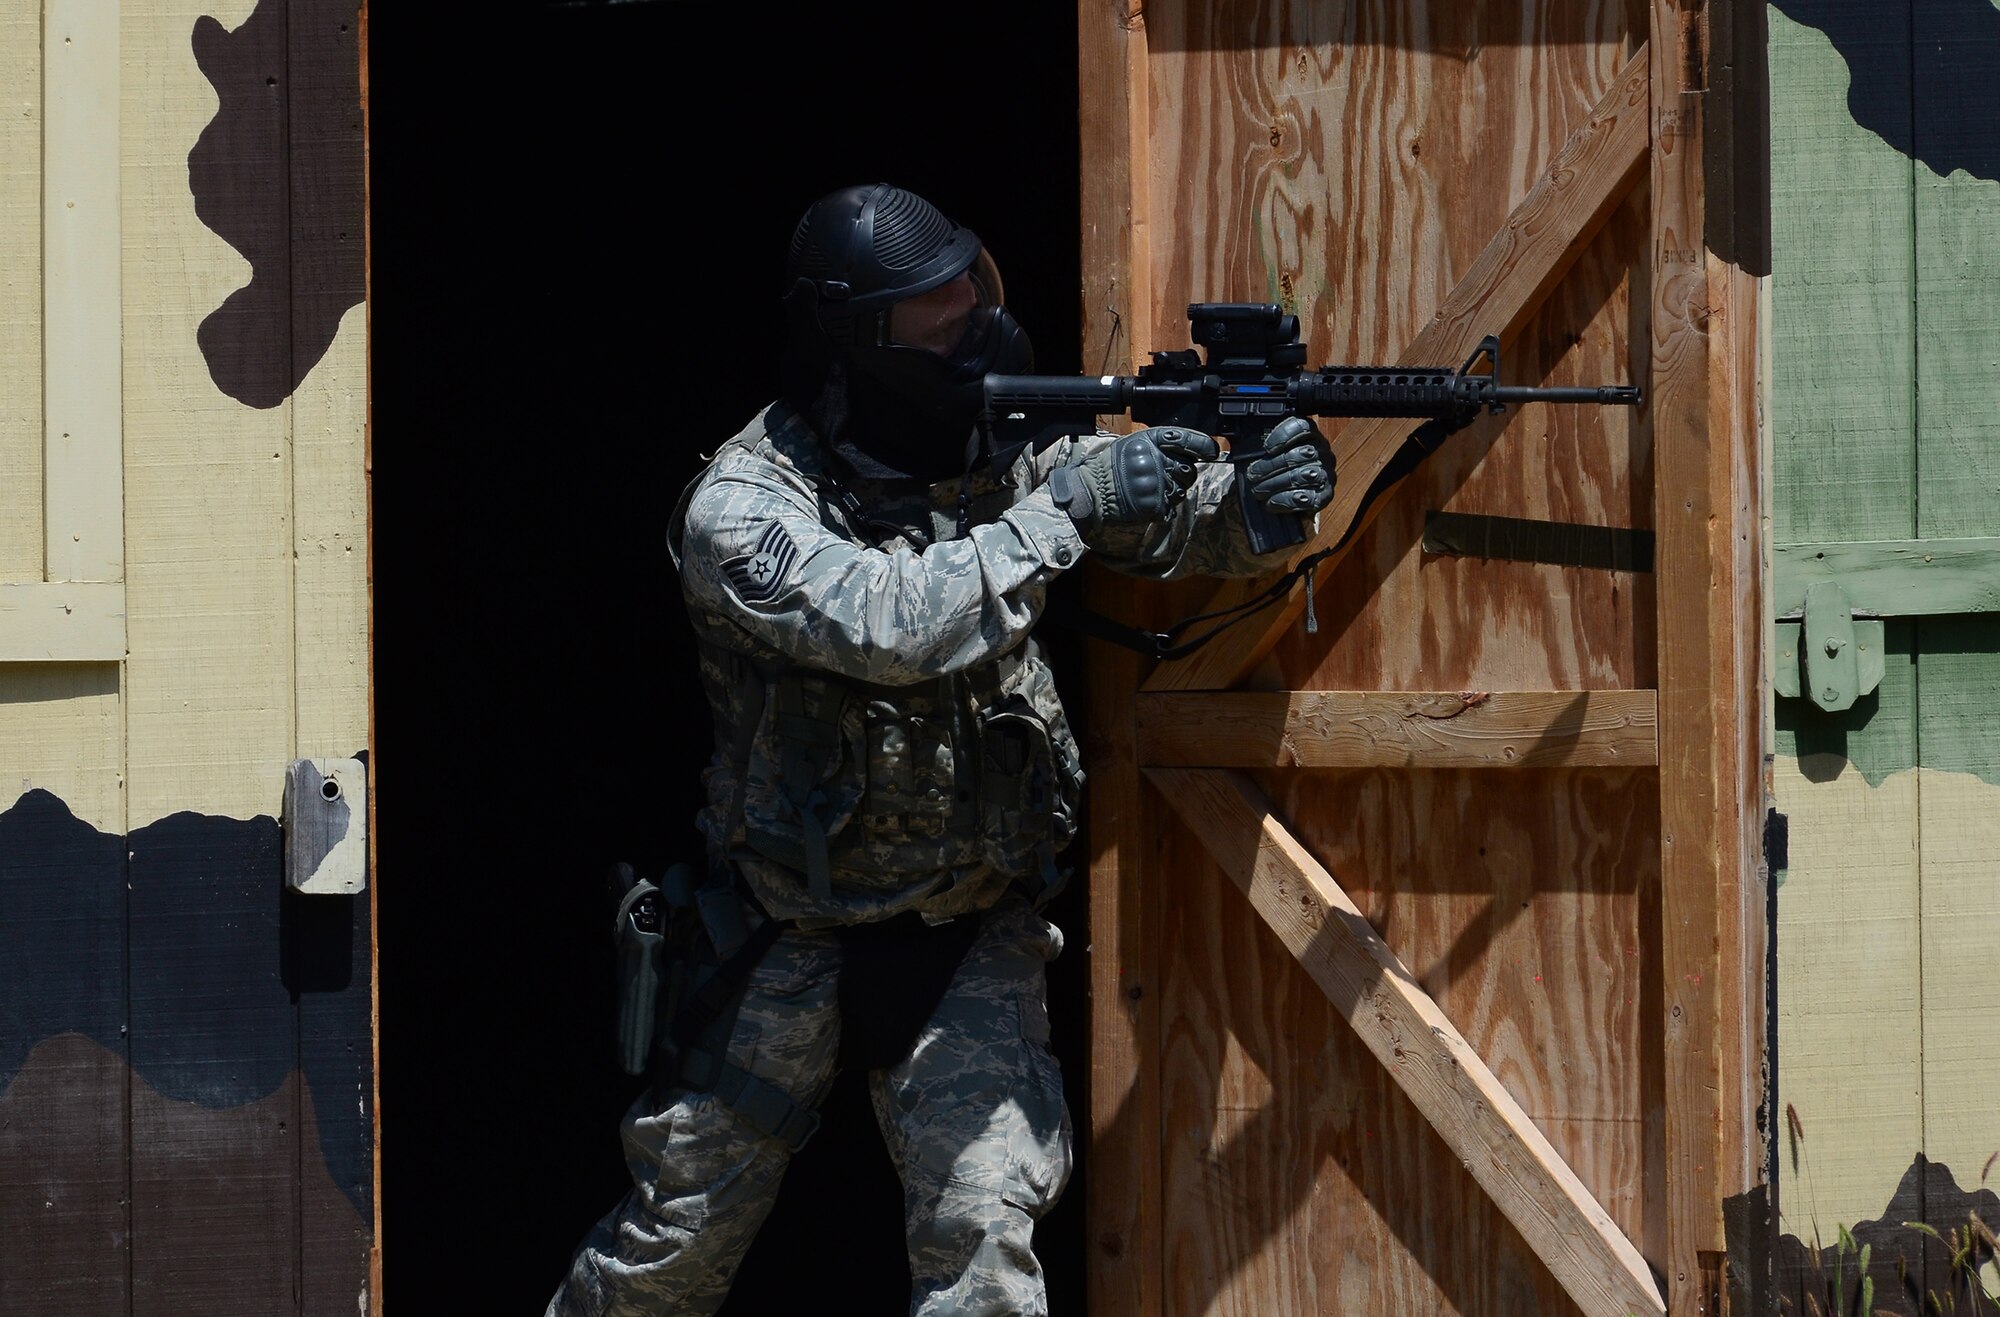 WRIGHT-PATTERSON AIR FORCE BASE, Ohio – Members of the 445th Security Forces Squadron participate in a shoot, move and communicate exercise at the Warfighter Training Center Aug. 15, 2015. The main goal of this training is to know how to shoot and use cover while moving toward a specific objective. The training incorporated firing weapons in conjunction with fire team and special weapons and tactics. ‘Simmunition’ ammunition, a soap-based dye round used to simulate real ammo was used during the training. Each scenario included objectives for both attacking and defensive forces. After each drill the instructor debriefed the members and discussed how to refine the tactics used. (U.S. Air Force photo/Senior Airman Joel McCullough)